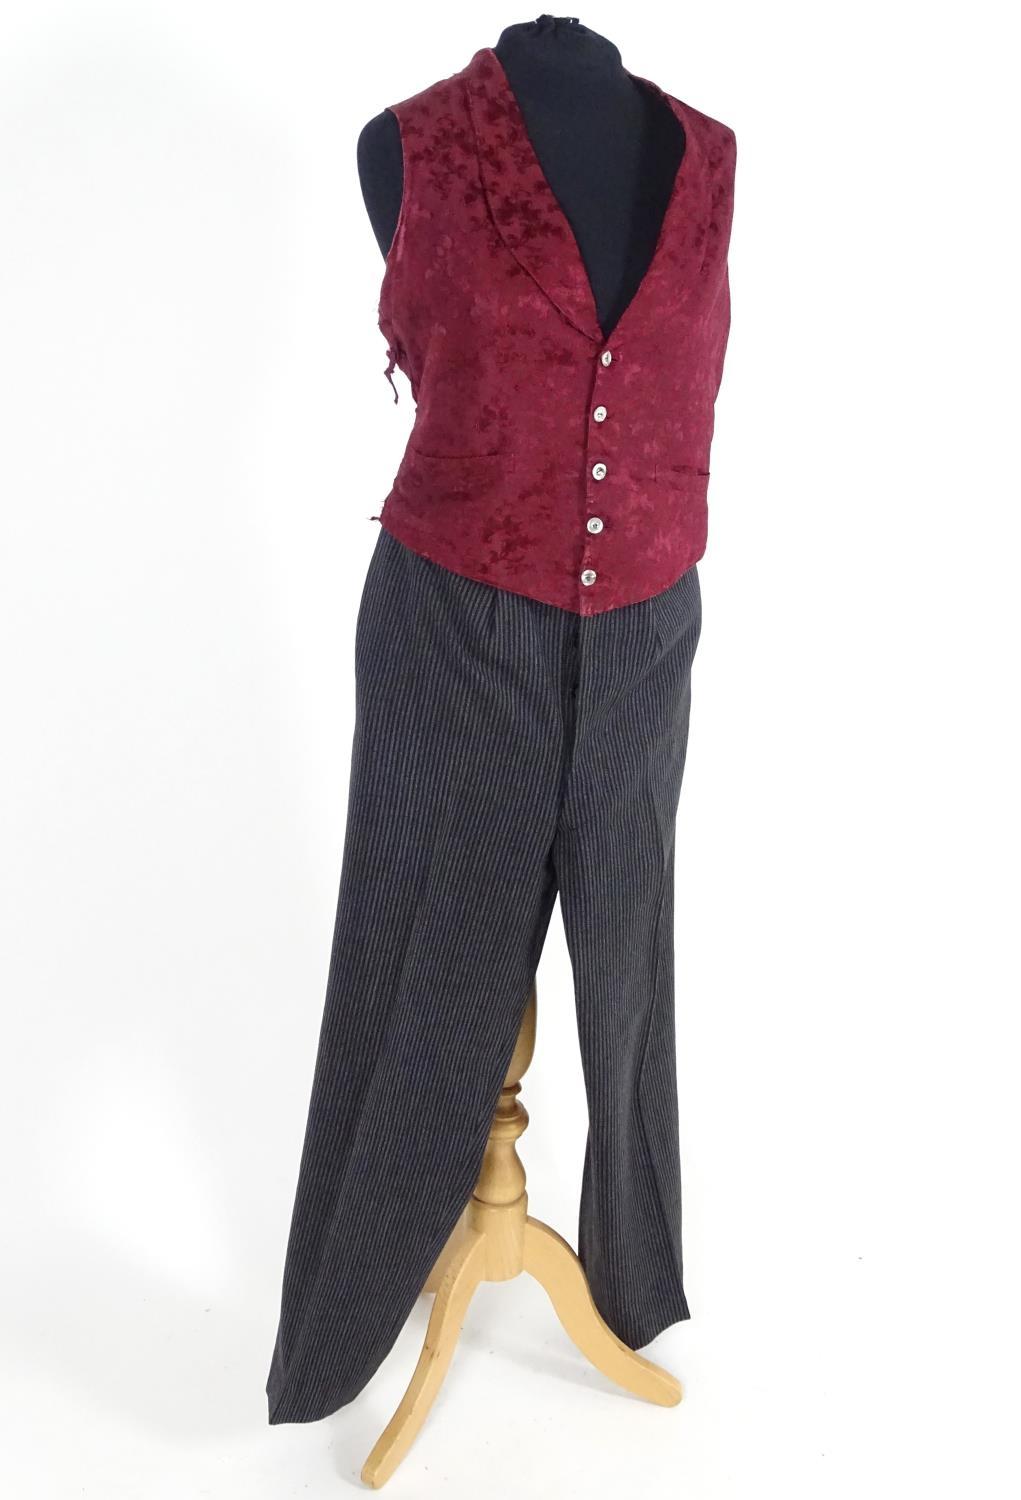 Vintage bespoke mens striped formal trousers with burgundy silk patterned waistcoat . Chest size 36" - Image 2 of 8